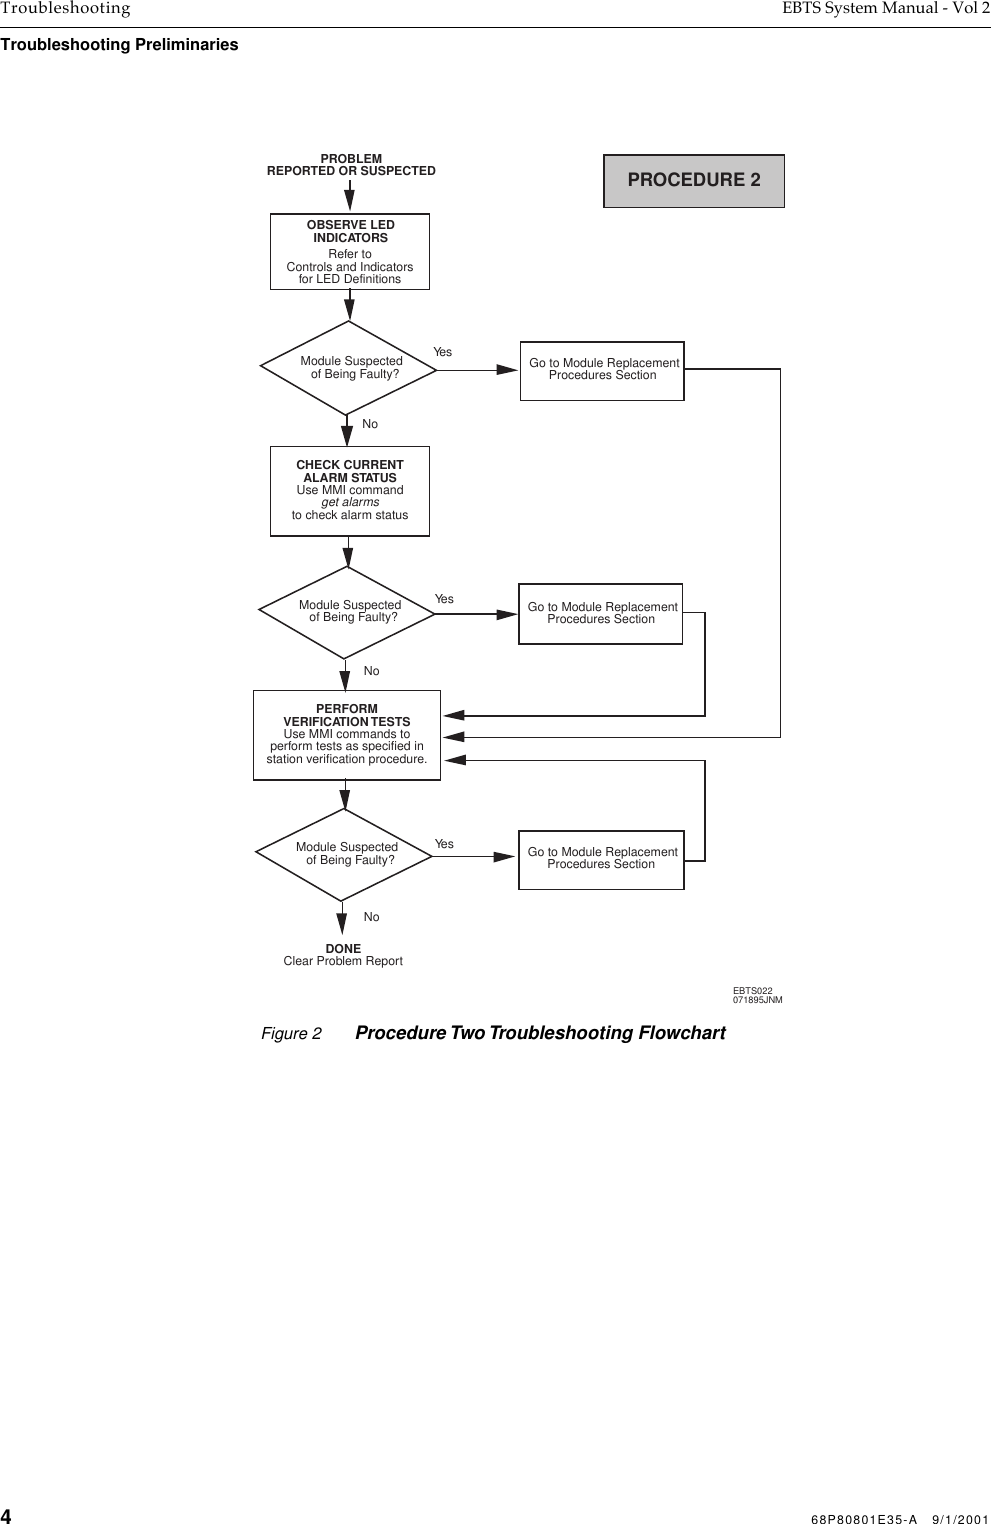 468P80801E35-A   9/1/2001Troubleshooting EBTS System Manual - Vol 2Troubleshooting Preliminaries Figure 2 Procedure Two Troubleshooting FlowchartPROCEDURE 2PROBLEMREPORTED OR SUSPECTEDDONEClear Problem ReportOBSERVE LEDINDICATORSModule Suspected  of Being Faulty?Ye s  Go to Module ReplacementProcedures SectionNoCHECK CURRENTALARM STATUSUse MMI commandget alarmsto check alarm statusModule Suspected  of Being Faulty?  Go to Module ReplacementProcedures SectionPERFORMVERIFICATION TESTSUse MMI commands toperform tests as specified instation verification procedure.Module Suspected  of Being Faulty?  Go to Module ReplacementProcedures SectionYe sNoYe sNoRefer toControls and Indicatorsfor LED DefinitionsEBTS022071895JNM